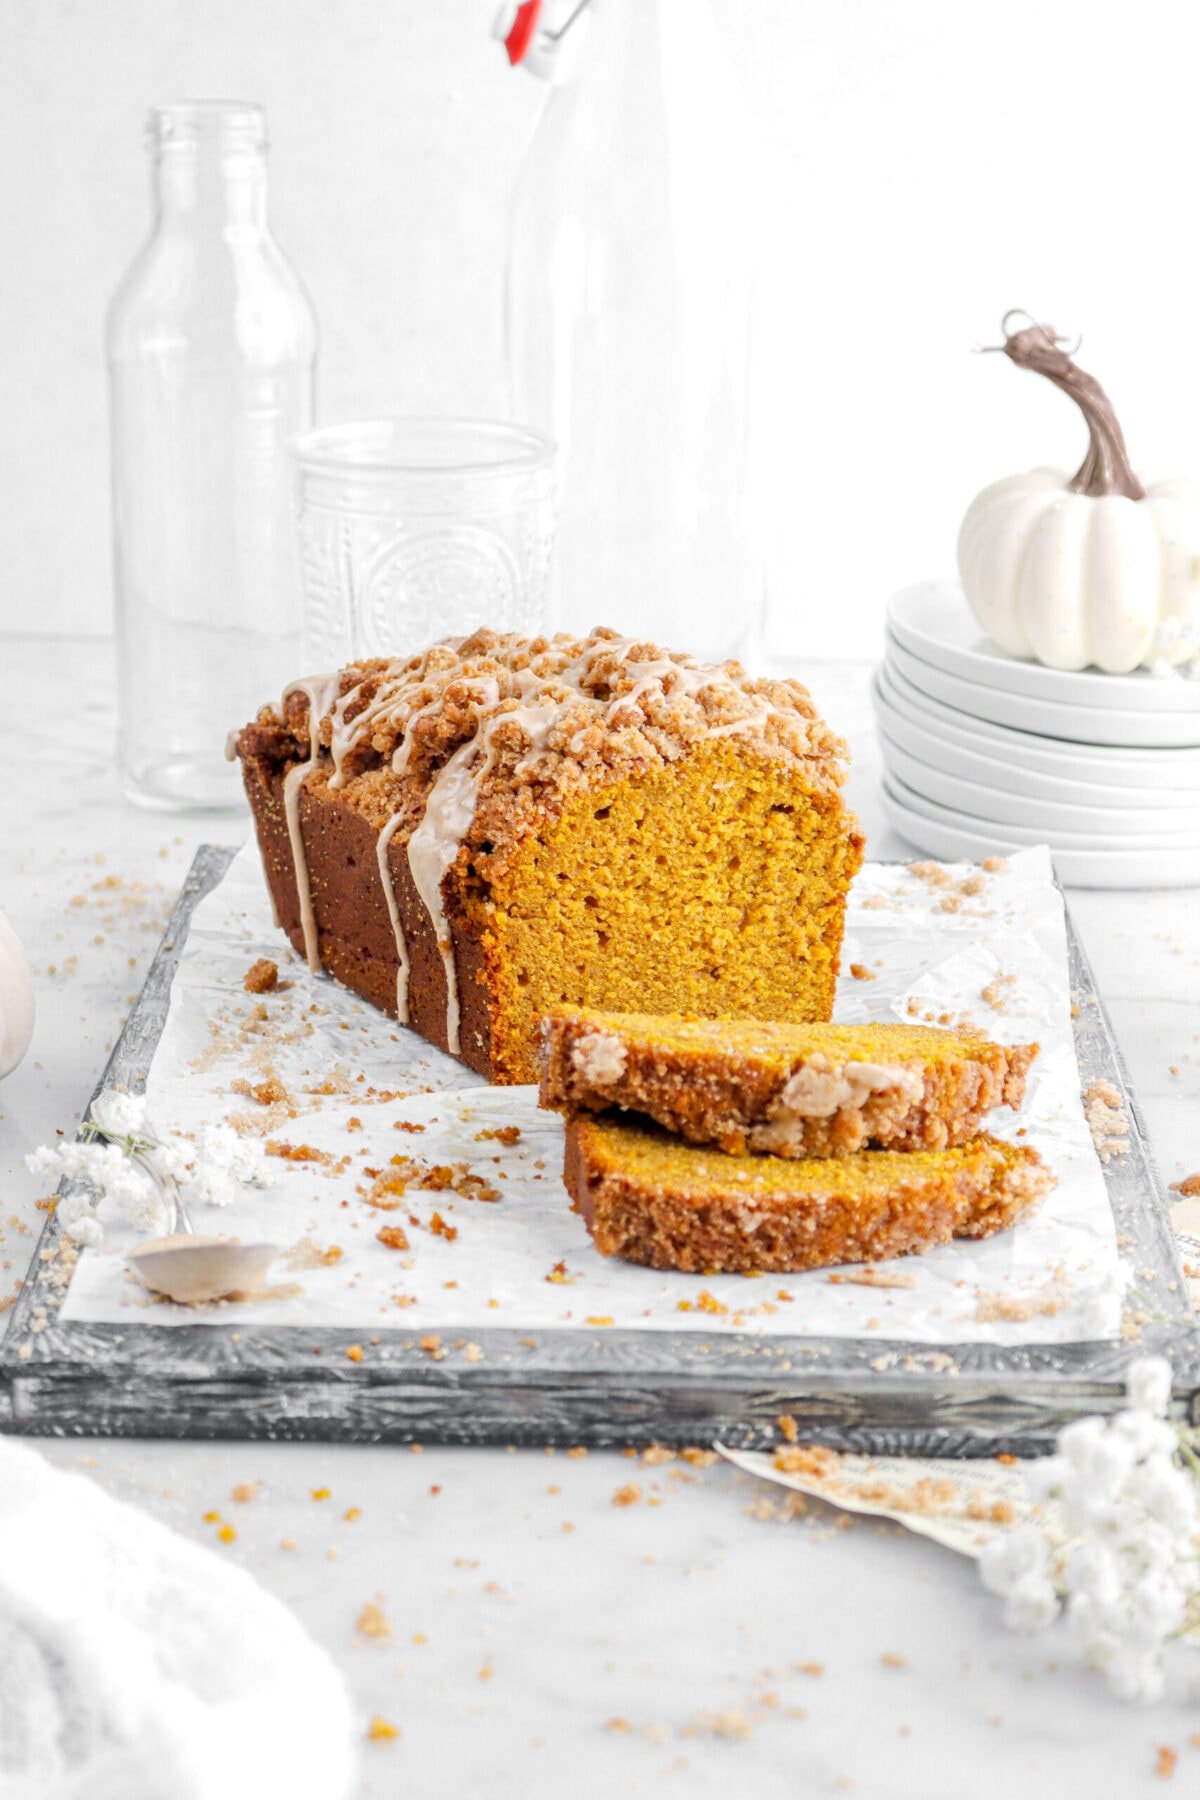 angled pumpkin loaf on upside down sheet pan with two slices of bread laying in front with stack of plates, small pumpkin, and empty glasses behind with streusel crumbs and white flowers around.